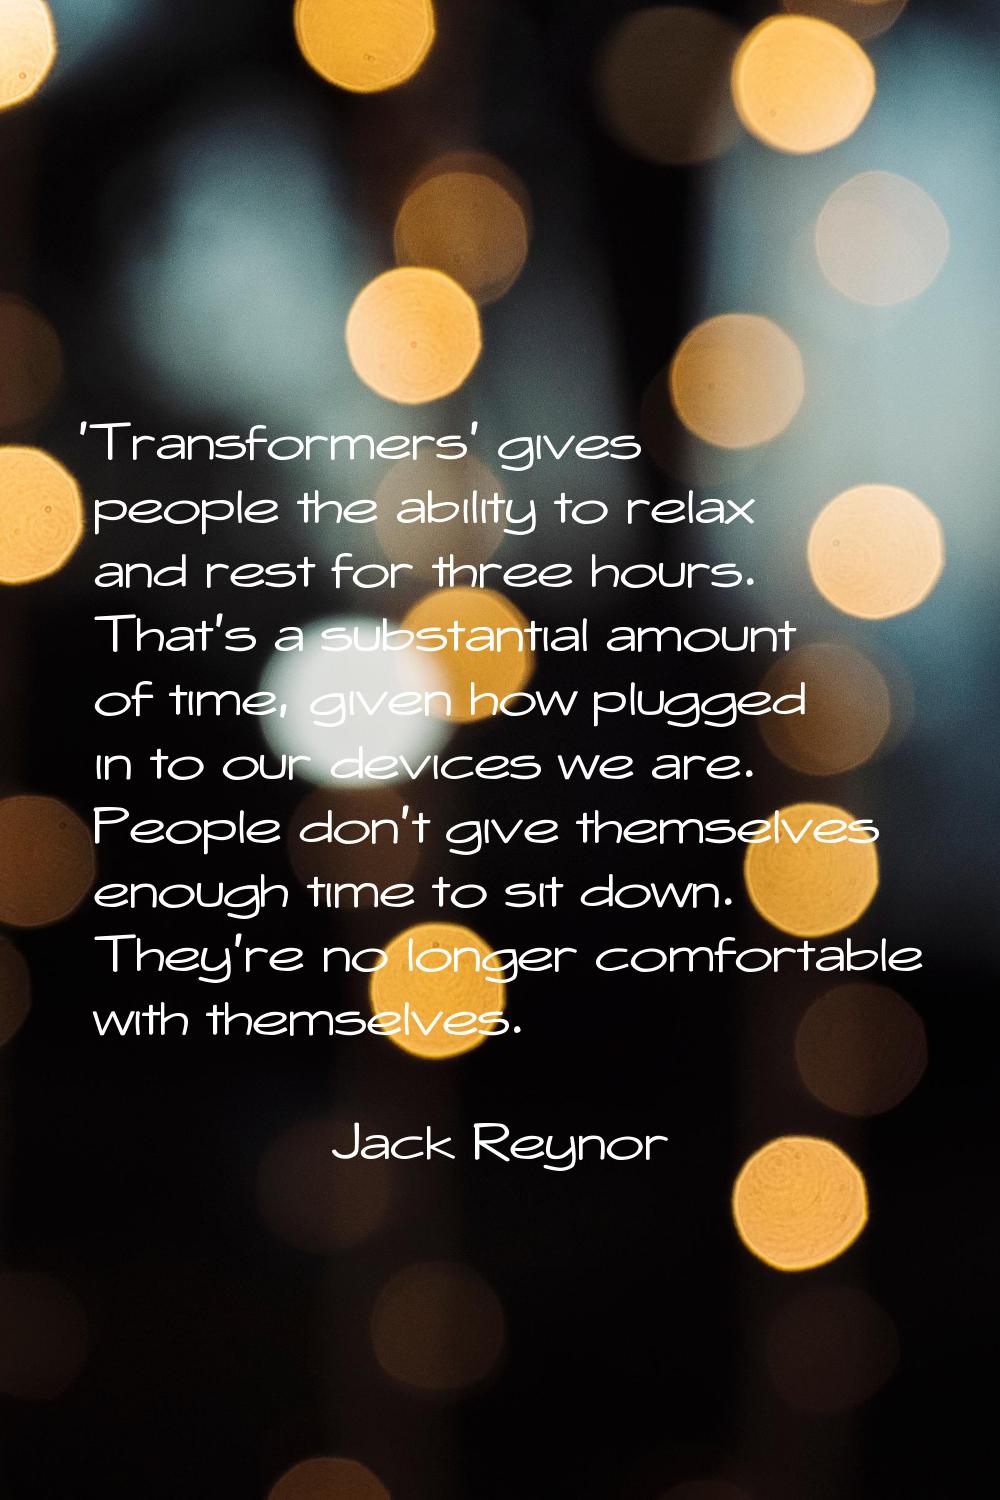 'Transformers' gives people the ability to relax and rest for three hours. That's a substantial amo